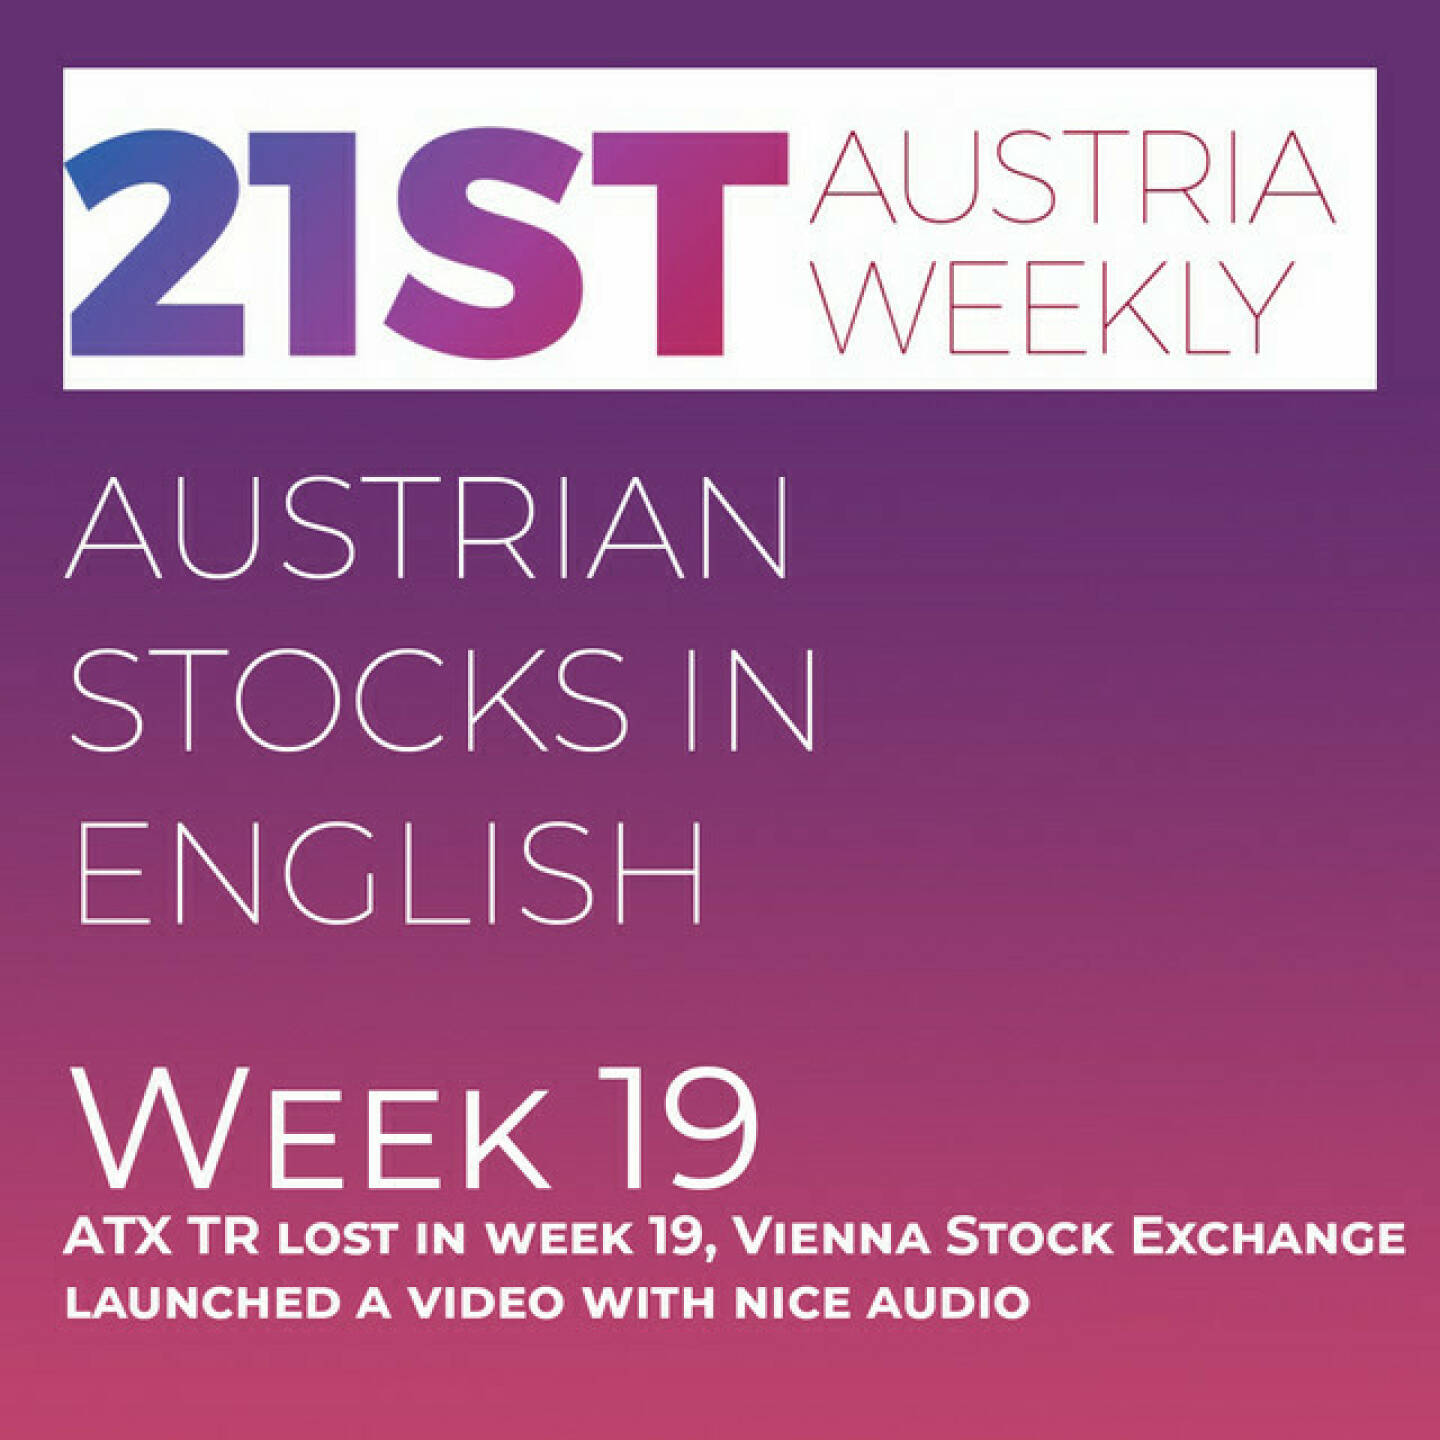 https://open.spotify.com/episode/6JK3H8hIPhmS7efG6FgRsv
Austrian Stocks in English: ATX TR lost in week 19, Vienna Stock Exchange launched a video with nice audio - <p>Welcome  to &#34;Austrian Stocks in English - presented by Palfinger&#34;, the english spoken weekly Summary for the Austrian Stock Market,  positioned every Sunday in the mostly german languaged Podcast &#34;Audio-CD.at Indie Podcasts&#34;- Wiener Börse, Sport Musik und Mehr“ .<br/><br/>First I play &#34;more than a marketplace&#34; the audio line of the new video for Vienna Stock Exchange, created by Nik Pichler.<br/><br/>The following script is based on our 21st Austria weekly and ATX TR lost in week 19 inspite of strong AT&amp;S and Österreichische Post 0,97 percent to 6822,25 points.  News came from Frequentis, Austriacard, Rosenbauer, Semperit, Vienna Stock Exchange, Strabag, Wolftank, Agrana, Verbund, Wienerberger, Addiko and Polytec, spoken by the absolutely smart Alison. <br/><br/>And here is the teaser for the corporate video (made by Nik Pichler) &#34;As the main provider of market infrastructure in the region, Wiener Börse AG is the gate to global markets. Operating the stock exchanges in Vienna and Prague, the group offers state-of-the-art systems, information and IT services. Listed companies receive maximum liquidity and investors benefit from fast and cost-effective trading by the market leader. Wiener Börse AG also collects and distributes stock market data and calculates the most important indices of the region. Because of this unique know-how the national stock exchanges in Budapest, Ljubljana and Zagreb trust its IT services. Additionally, the group holds stakes in energy exchanges and clearing houses. &#34;<br/><br/><a href=https://www.youtube.com/watch?v&#61;wobYDTi6THo target=_blank>https://www.youtube.com/watch?v&#61;wobYDTi6THo</a> <br/><br/><a href=https://boerse-social.com/21staustria target=_blank>https://boerse-social.com/21staustria</a><br/><br/>Please rate my Podcast on Apple Podcasts (or Spotify): <a href=https://podcasts.apple.com/at/podcast/audio-cd-at-indie-podcasts-wiener-boerse-sport-musik-und-mehr/id1484919130 target=_blank>https://podcasts.apple.com/at/podcast/audio-cd-at-indie-podcasts-wiener-boerse-sport-musik-und-mehr/id1484919130</a> .And please spread the word : <a href=https://www.boerse-social.com/21staustria target=_blank>https://www.boerse-social.com/21staustria</a> - the address to subscribe to the weekly summary as a PDF.</p>